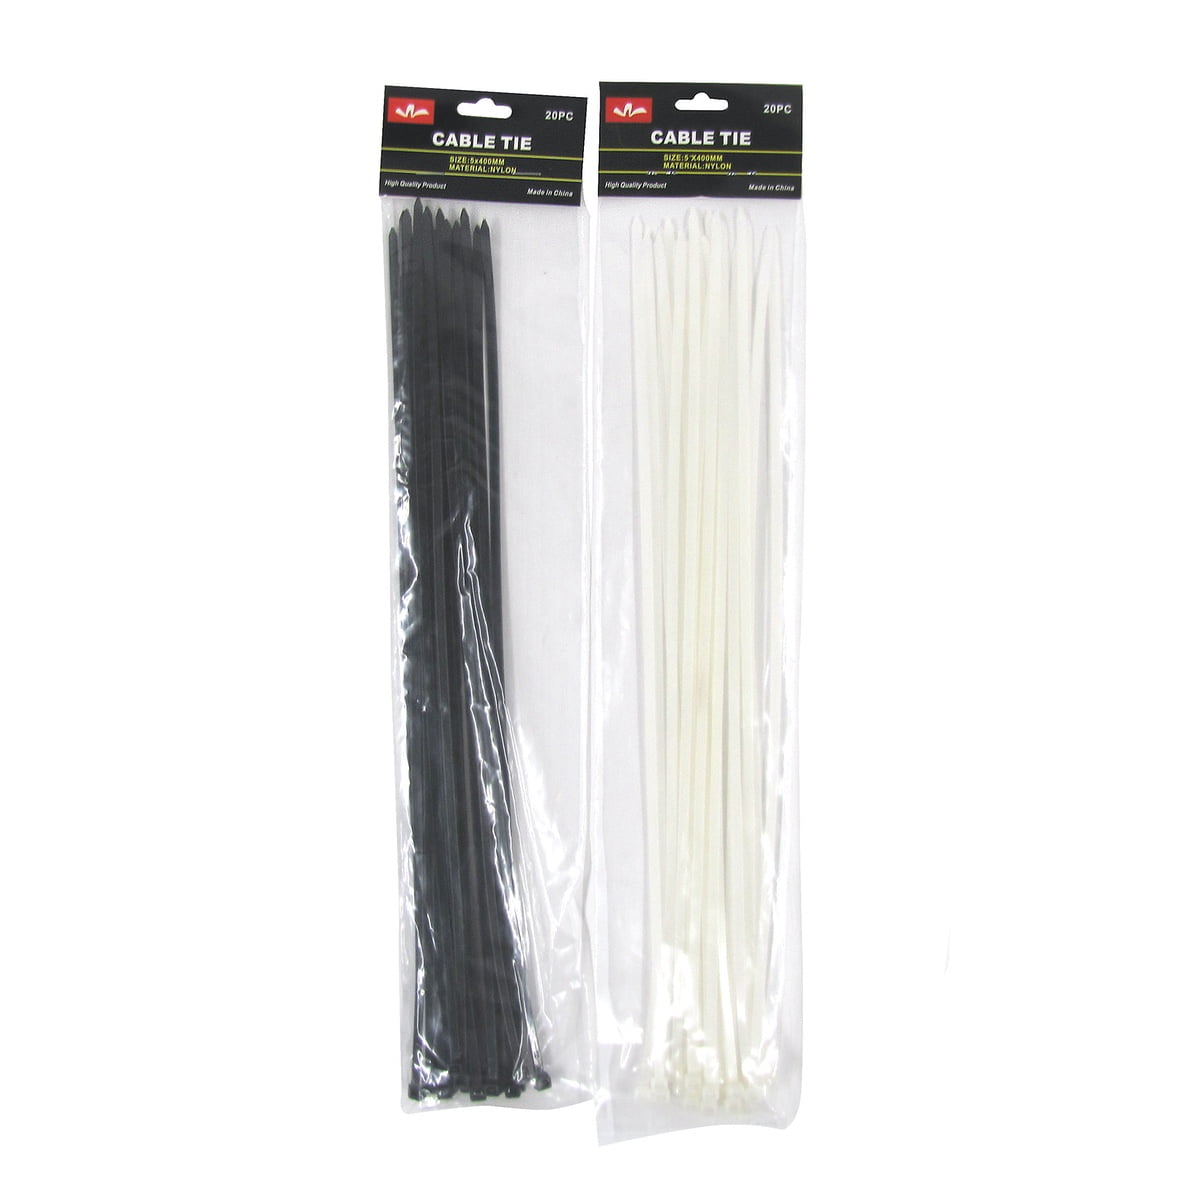 Large Zip Ties 100Pcs Heavy Duty Cable 16 Inch Premium Strong Self-Locking Nylon 